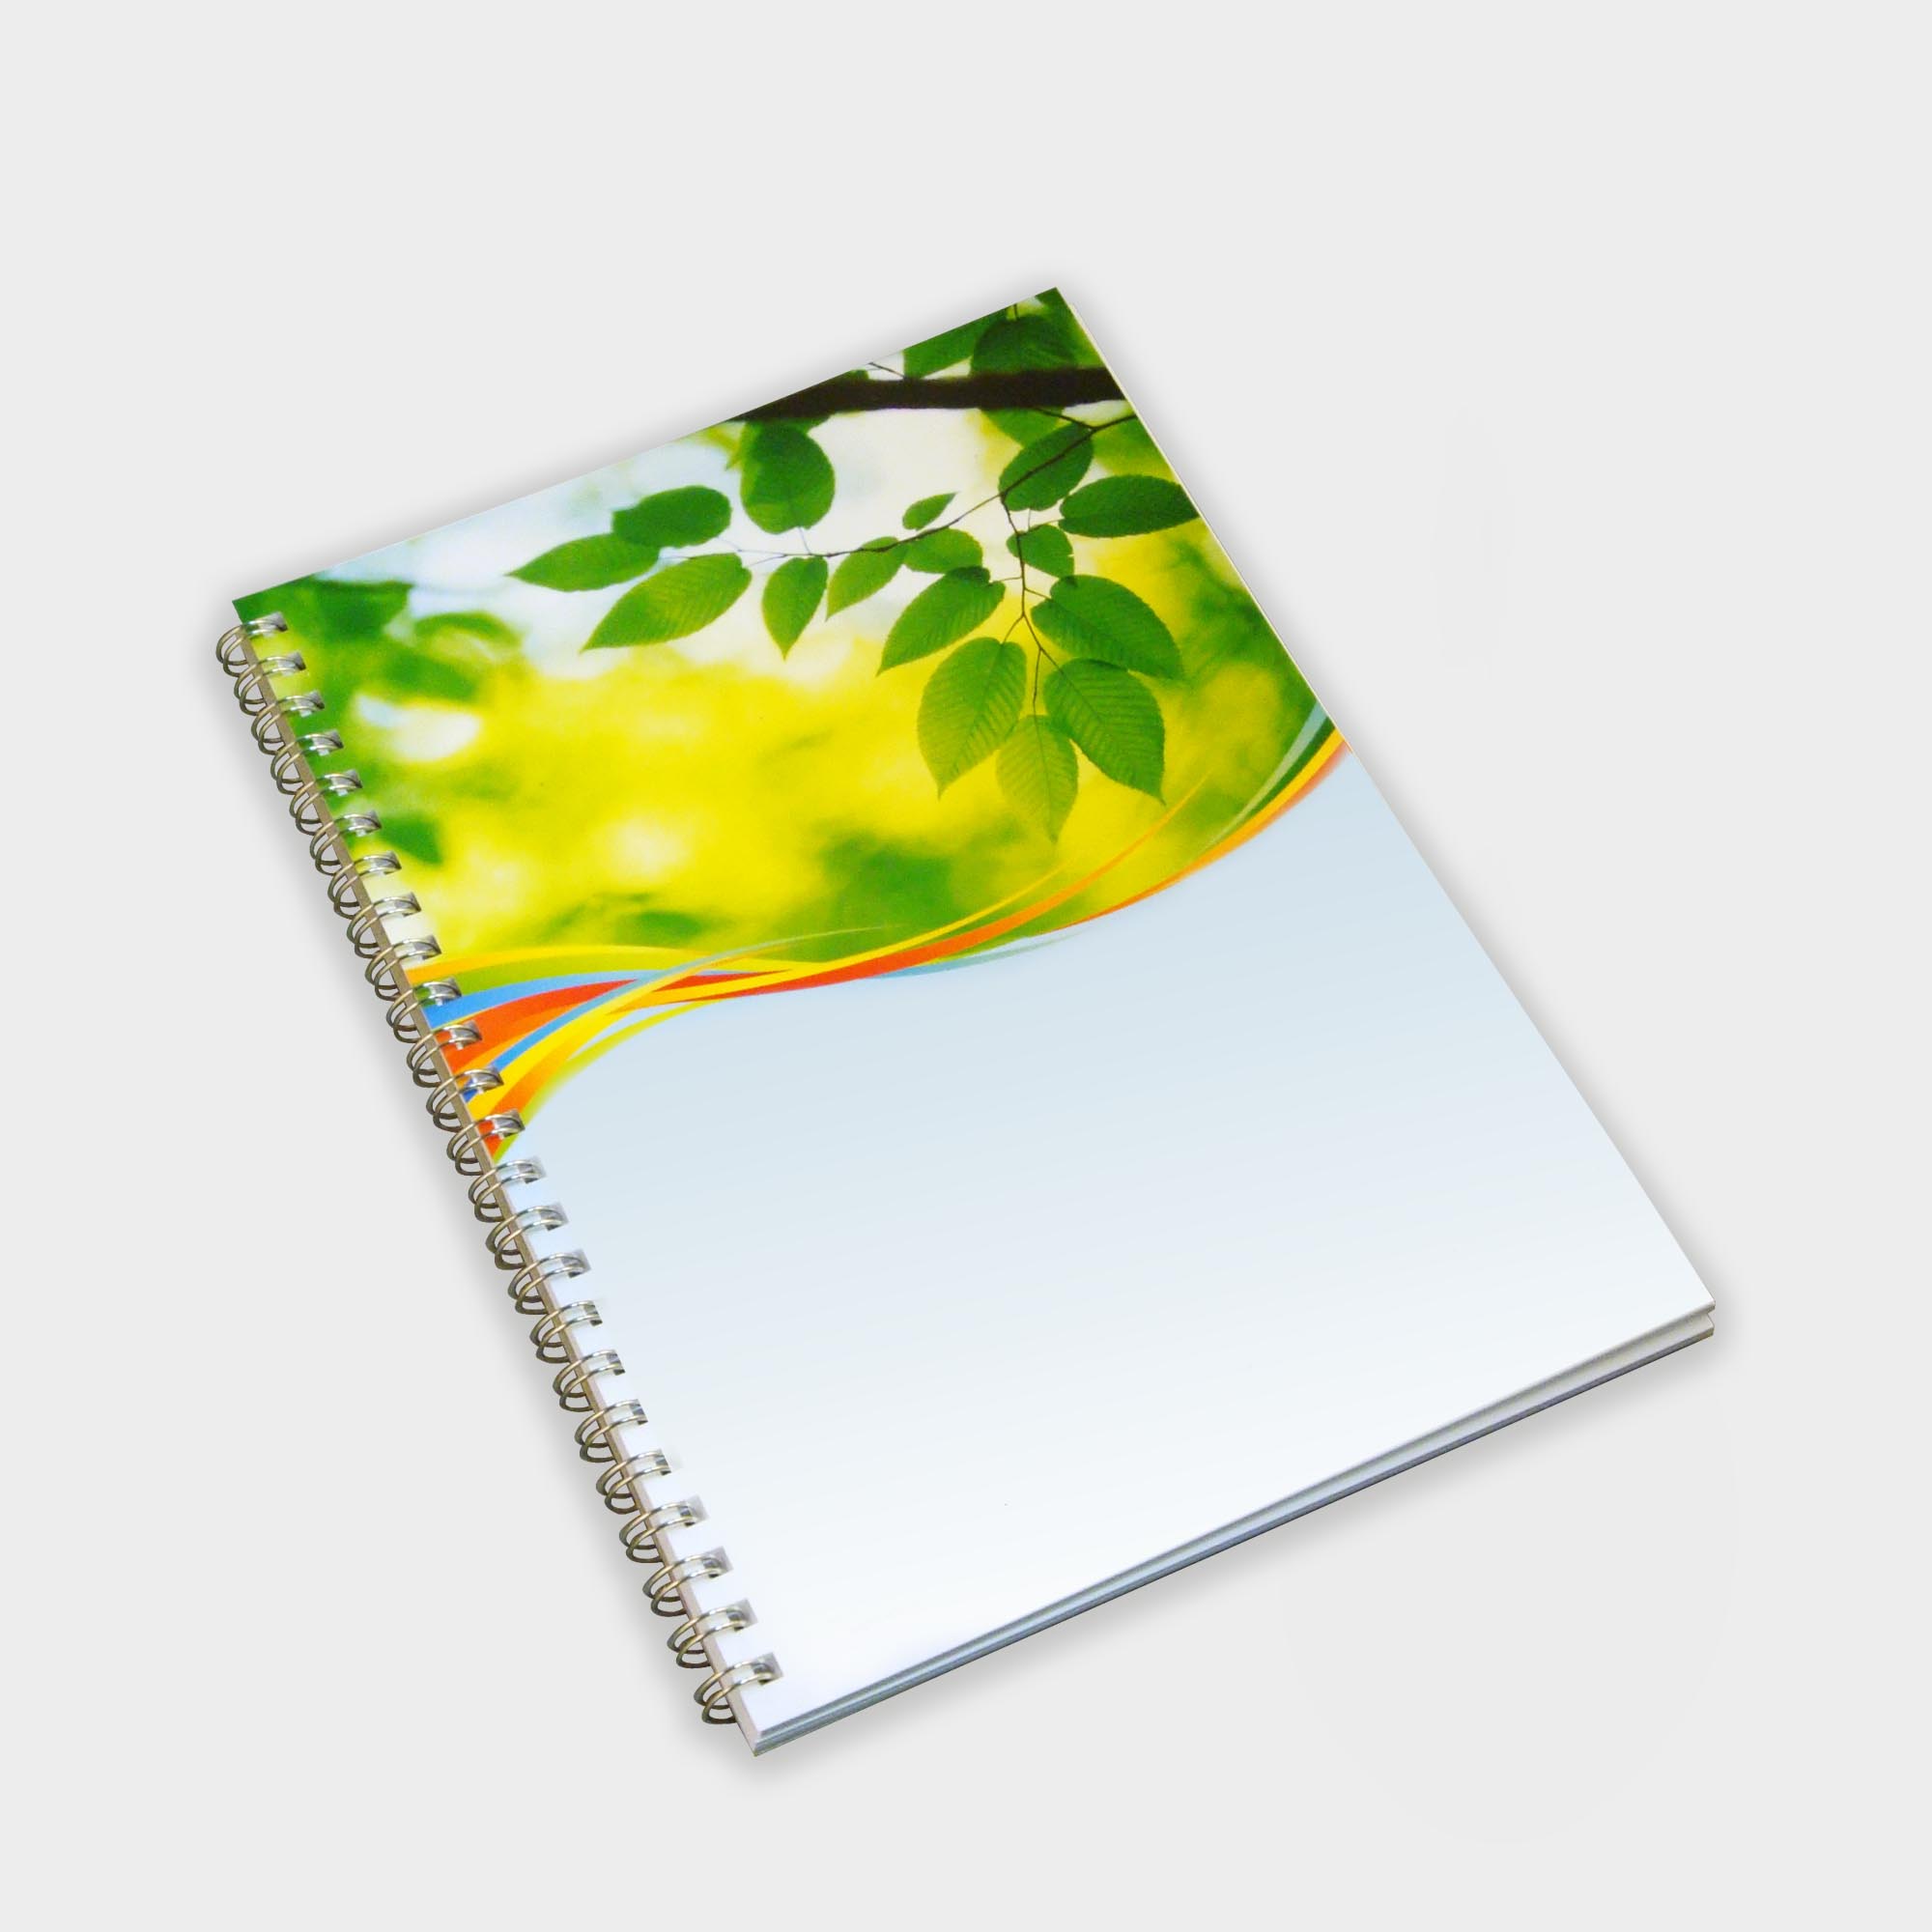 The Green & Good Wirebound Notebook is made from recycled paper - size A5. The cover is 250gsm, the sheets are 80gsm and the backboard is 500 micron. Comes wirebound with 50 sheets as standard. Please contact us if you require a bespoke number of sheets.